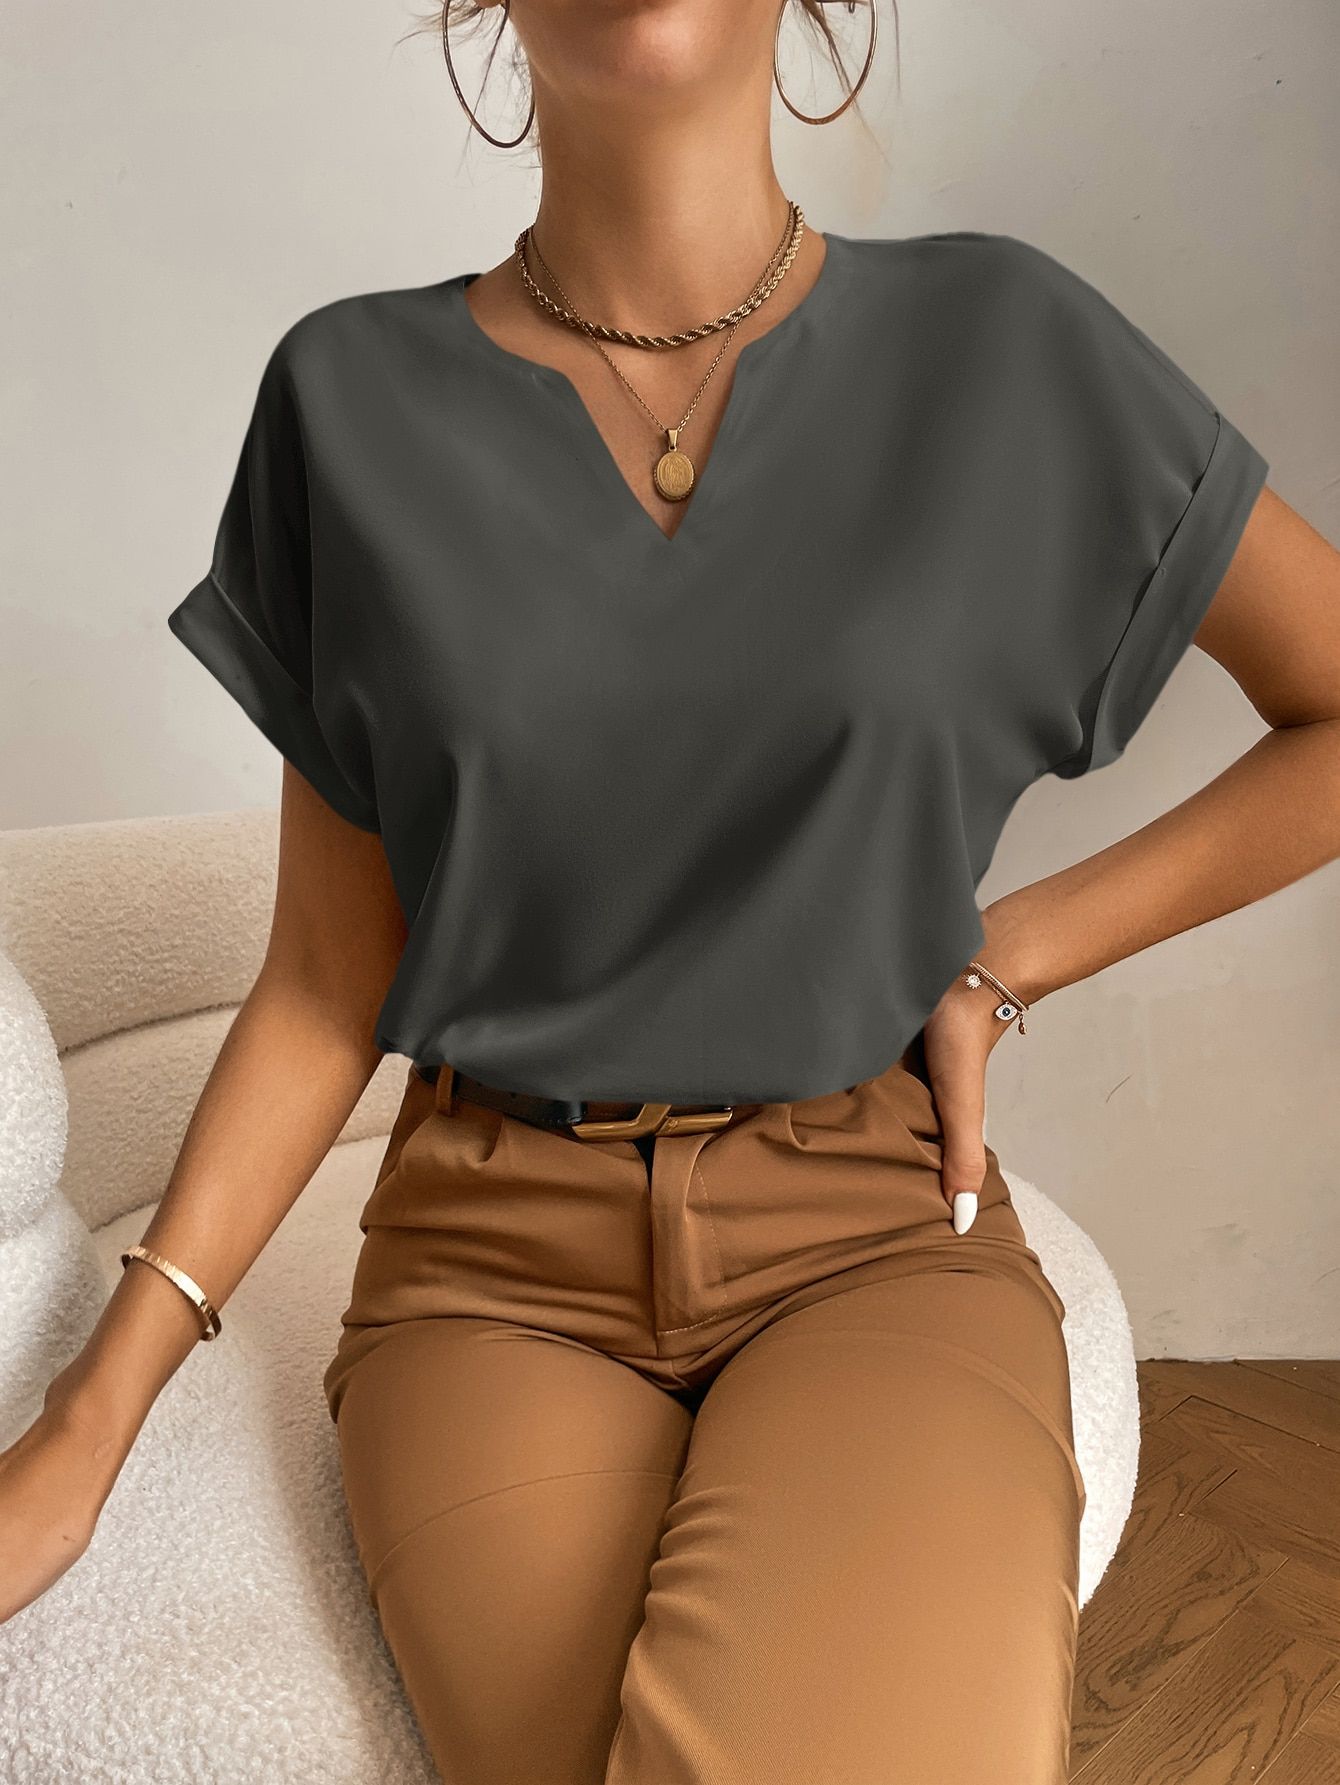 Chic and Sophisticated: Short Blouses for Effortless Elegance